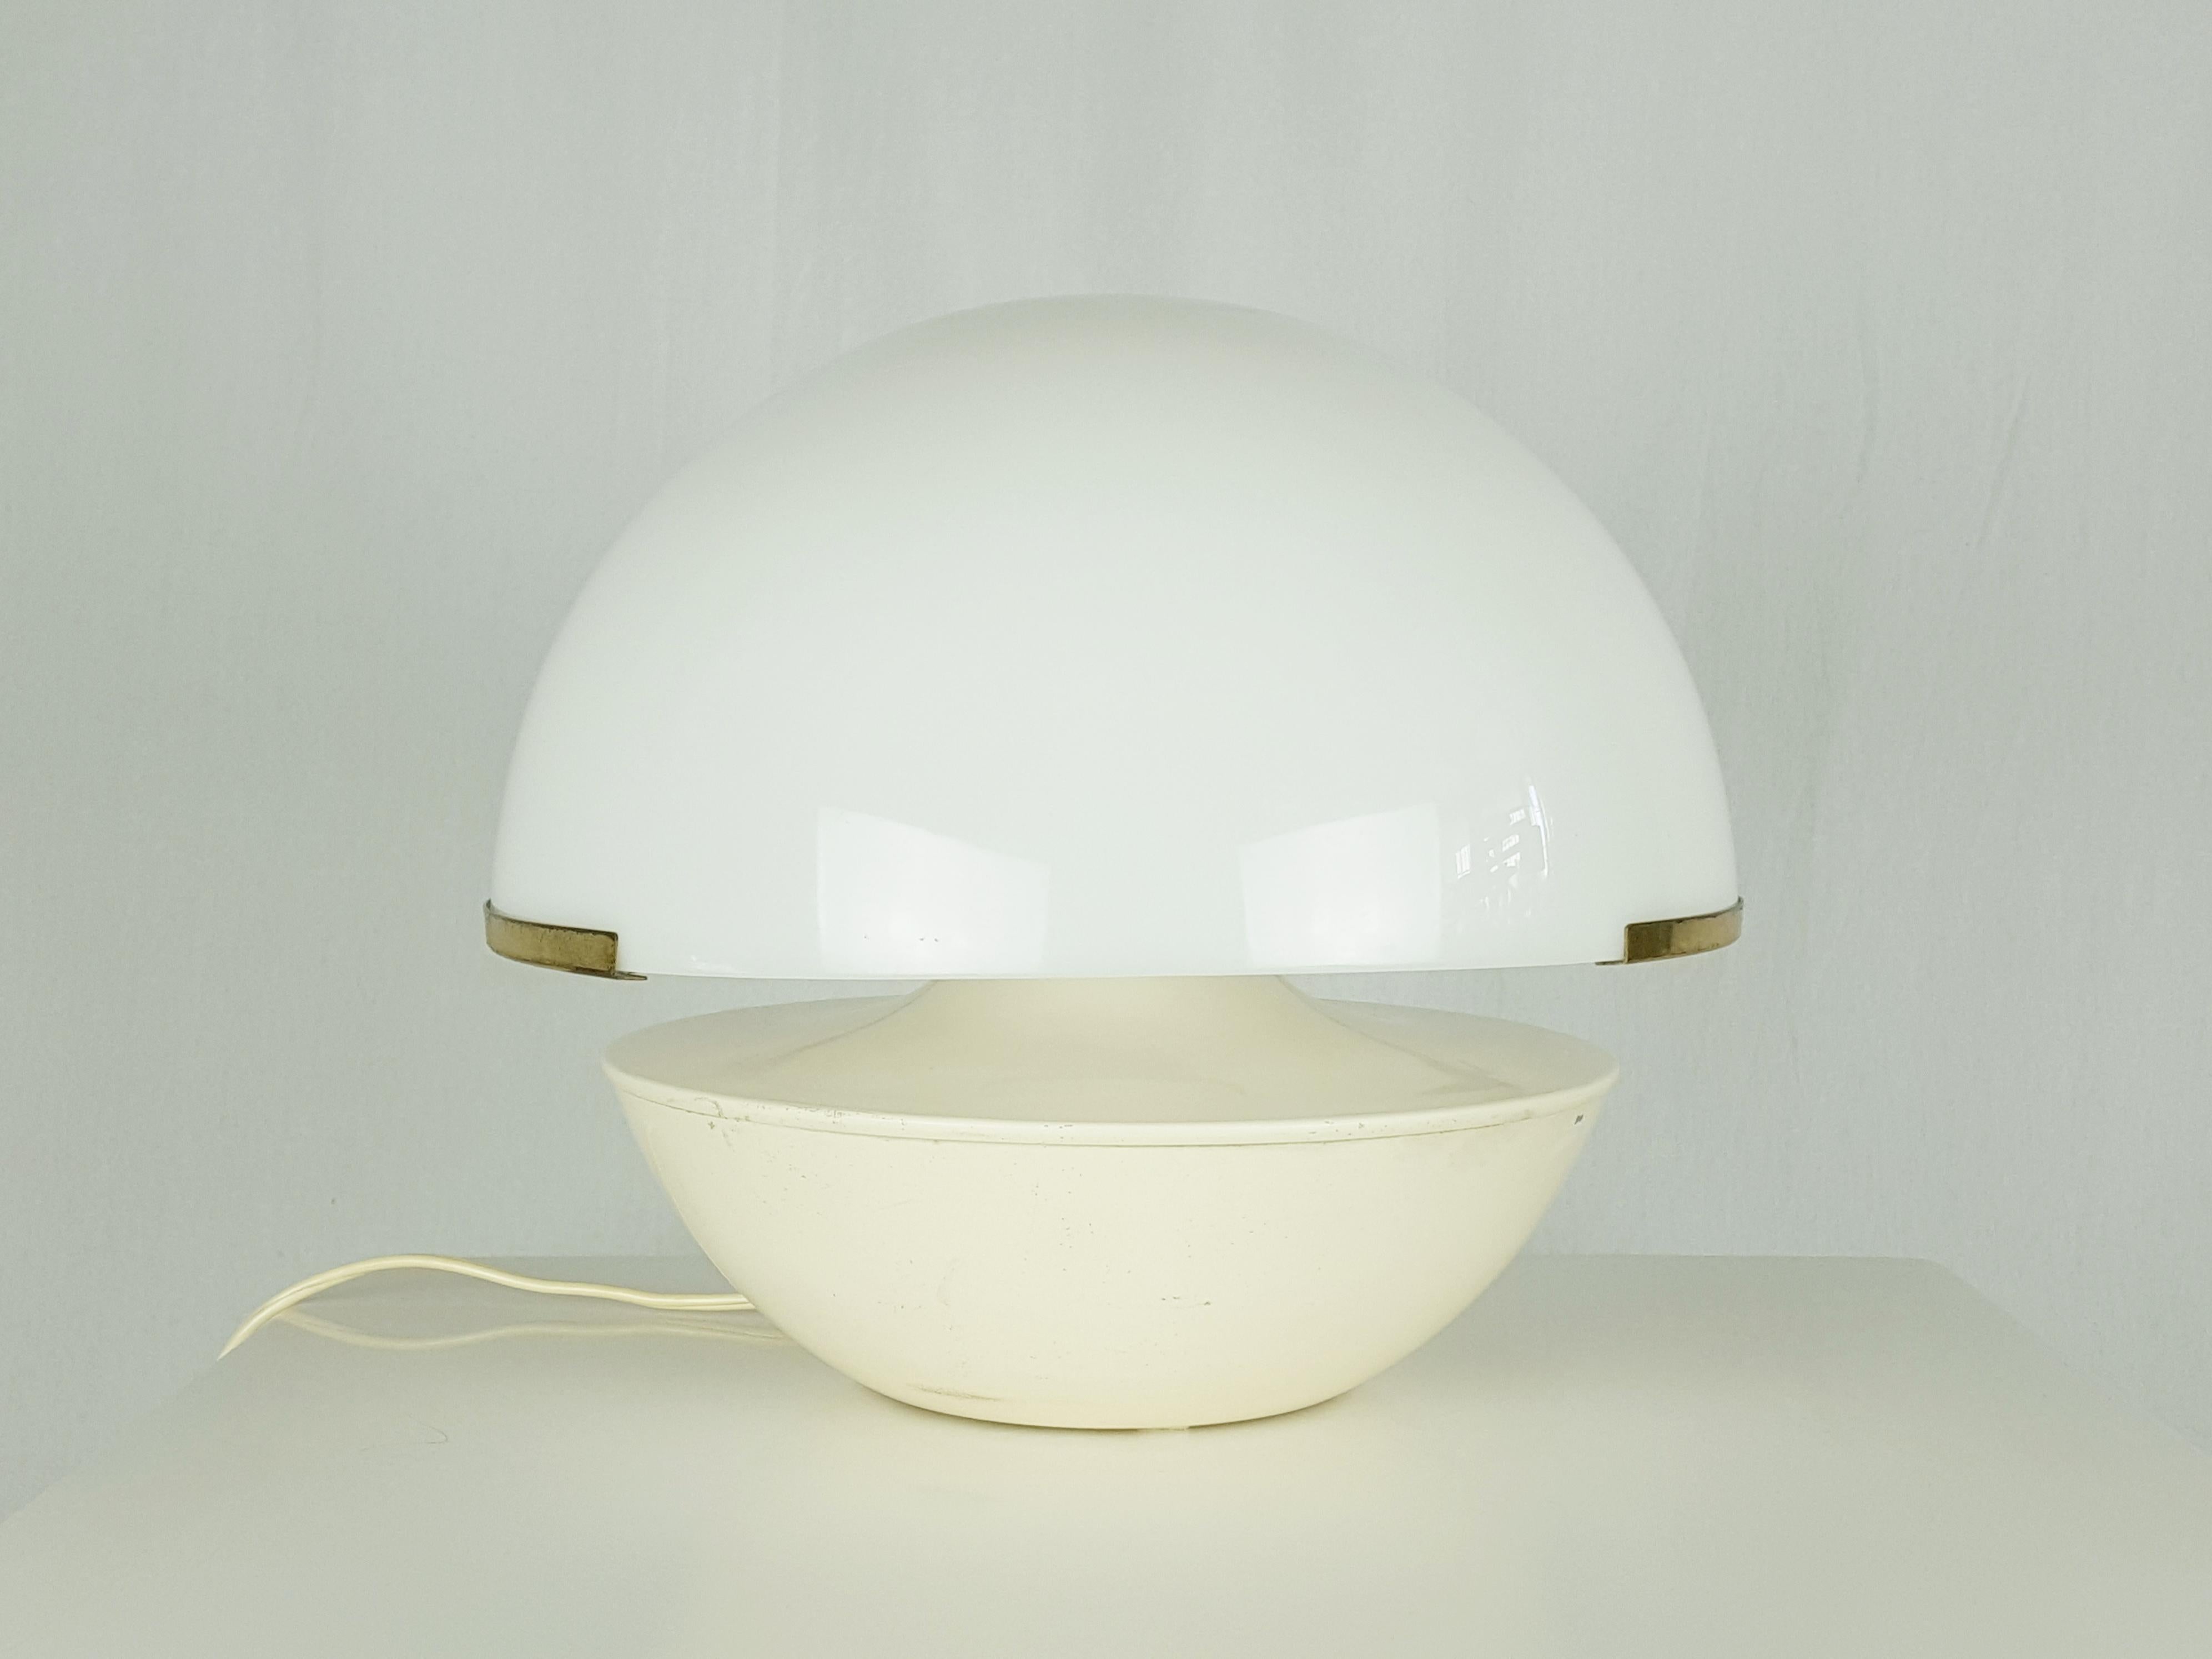 Table lamp produced in the late 1960s in Italy. Ivory white metal body with brass support structure and hemispherical white perspex lampshade. The lampshade is interlocked on the brass structure. Original electrical system with a lamp holder